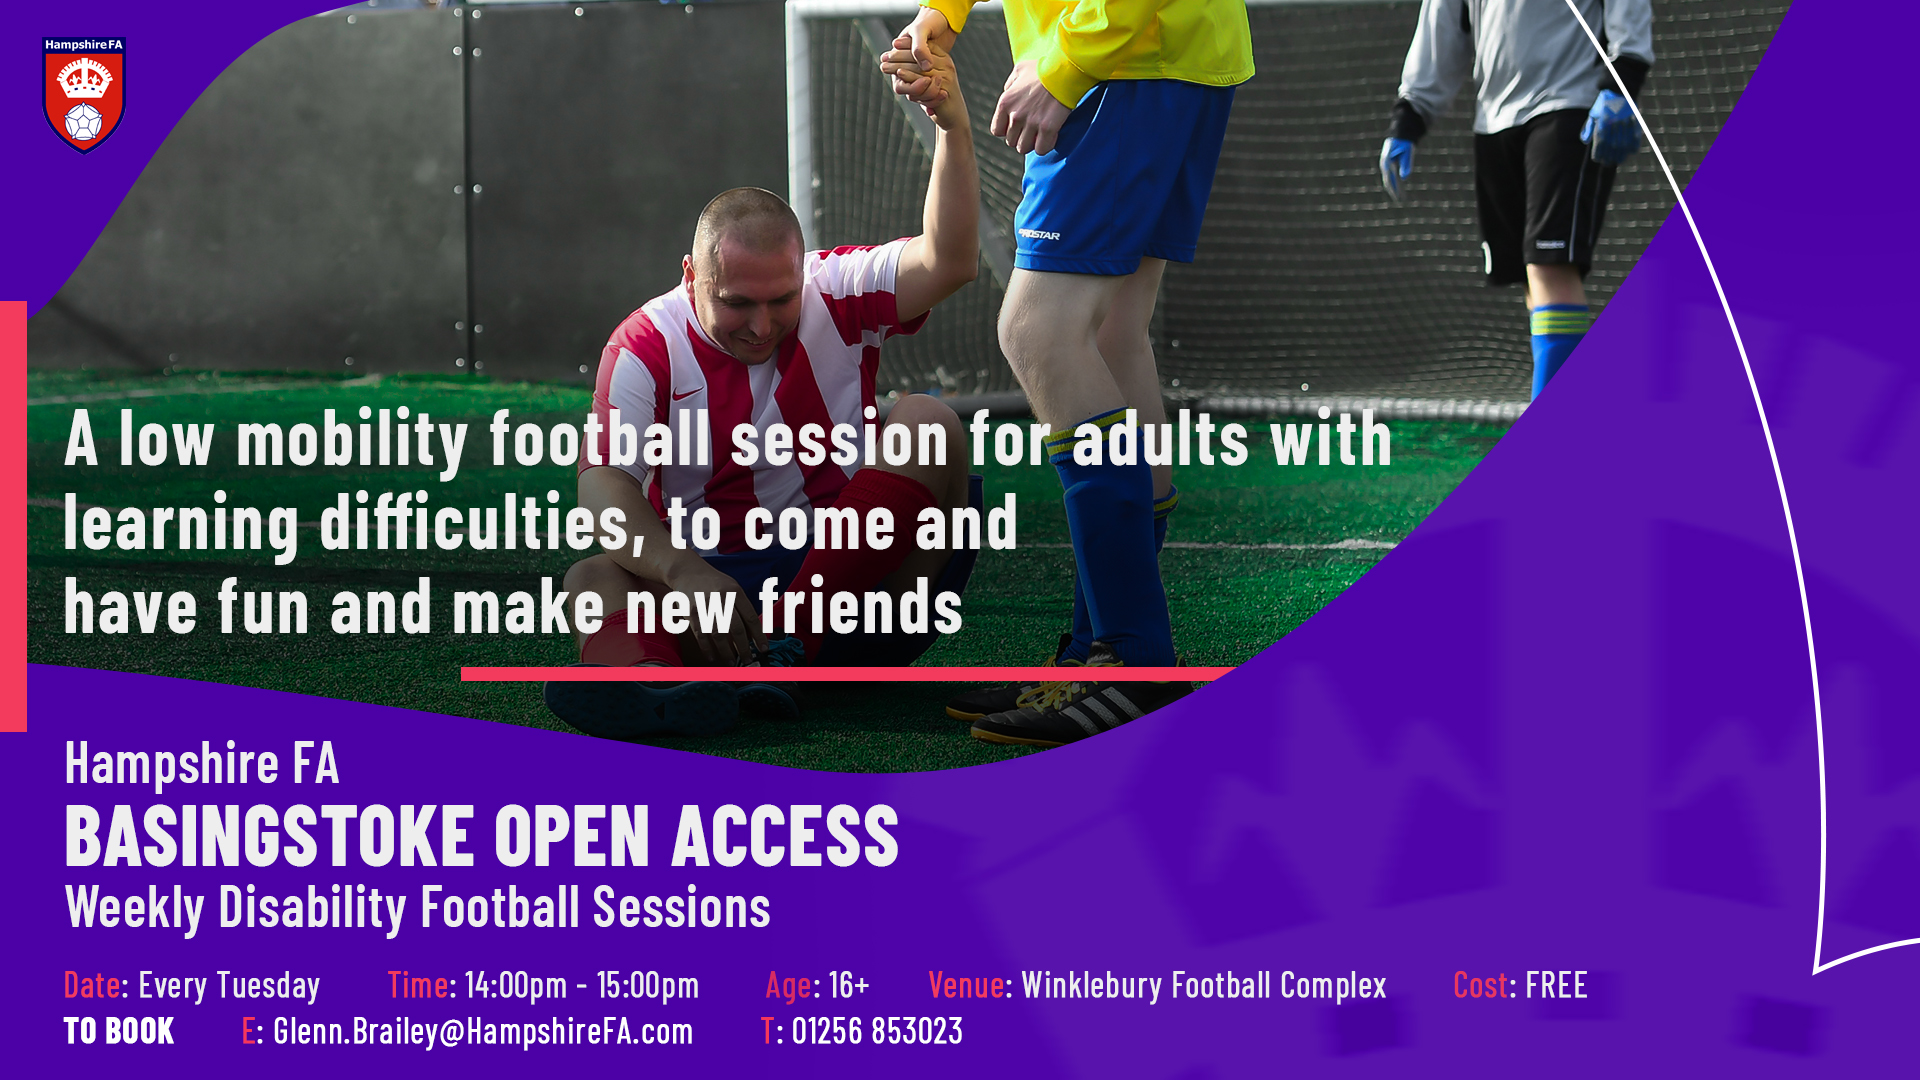 Open Access Disability Session - Basingstoke